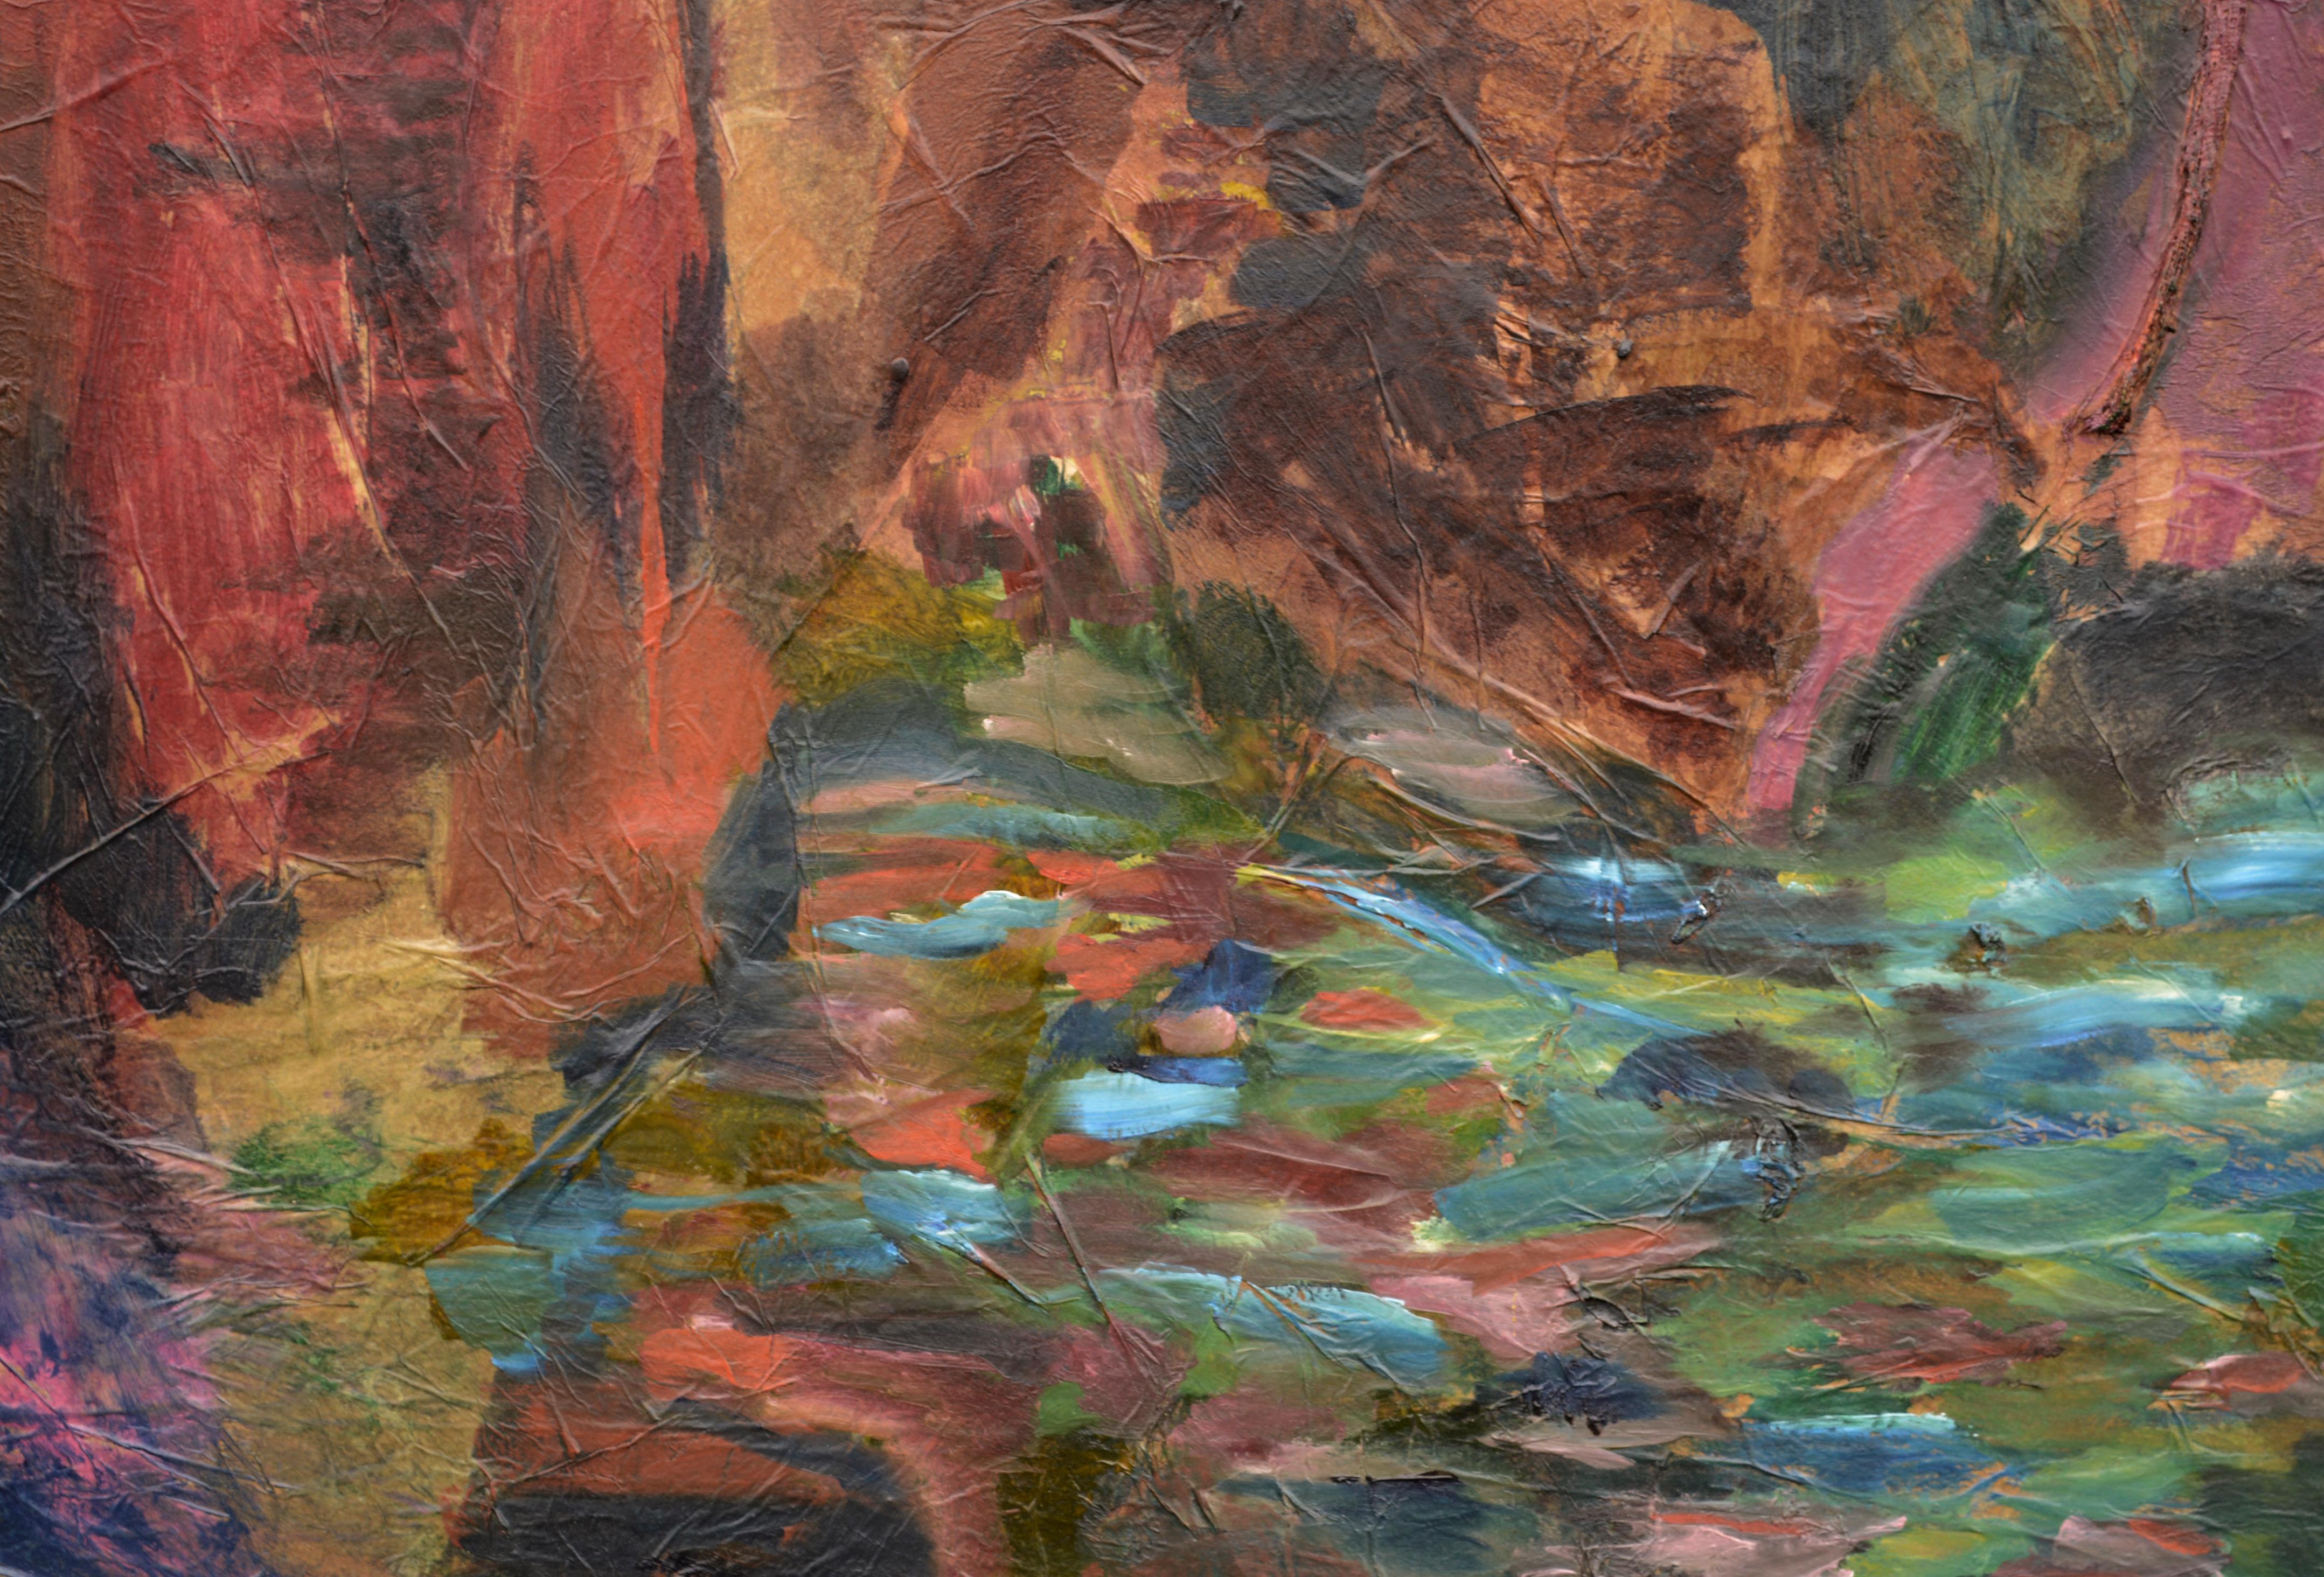 Shimmering Pond in the Woods Abstract 1960 - Abstract Expressionist Painting by Rose Herzog